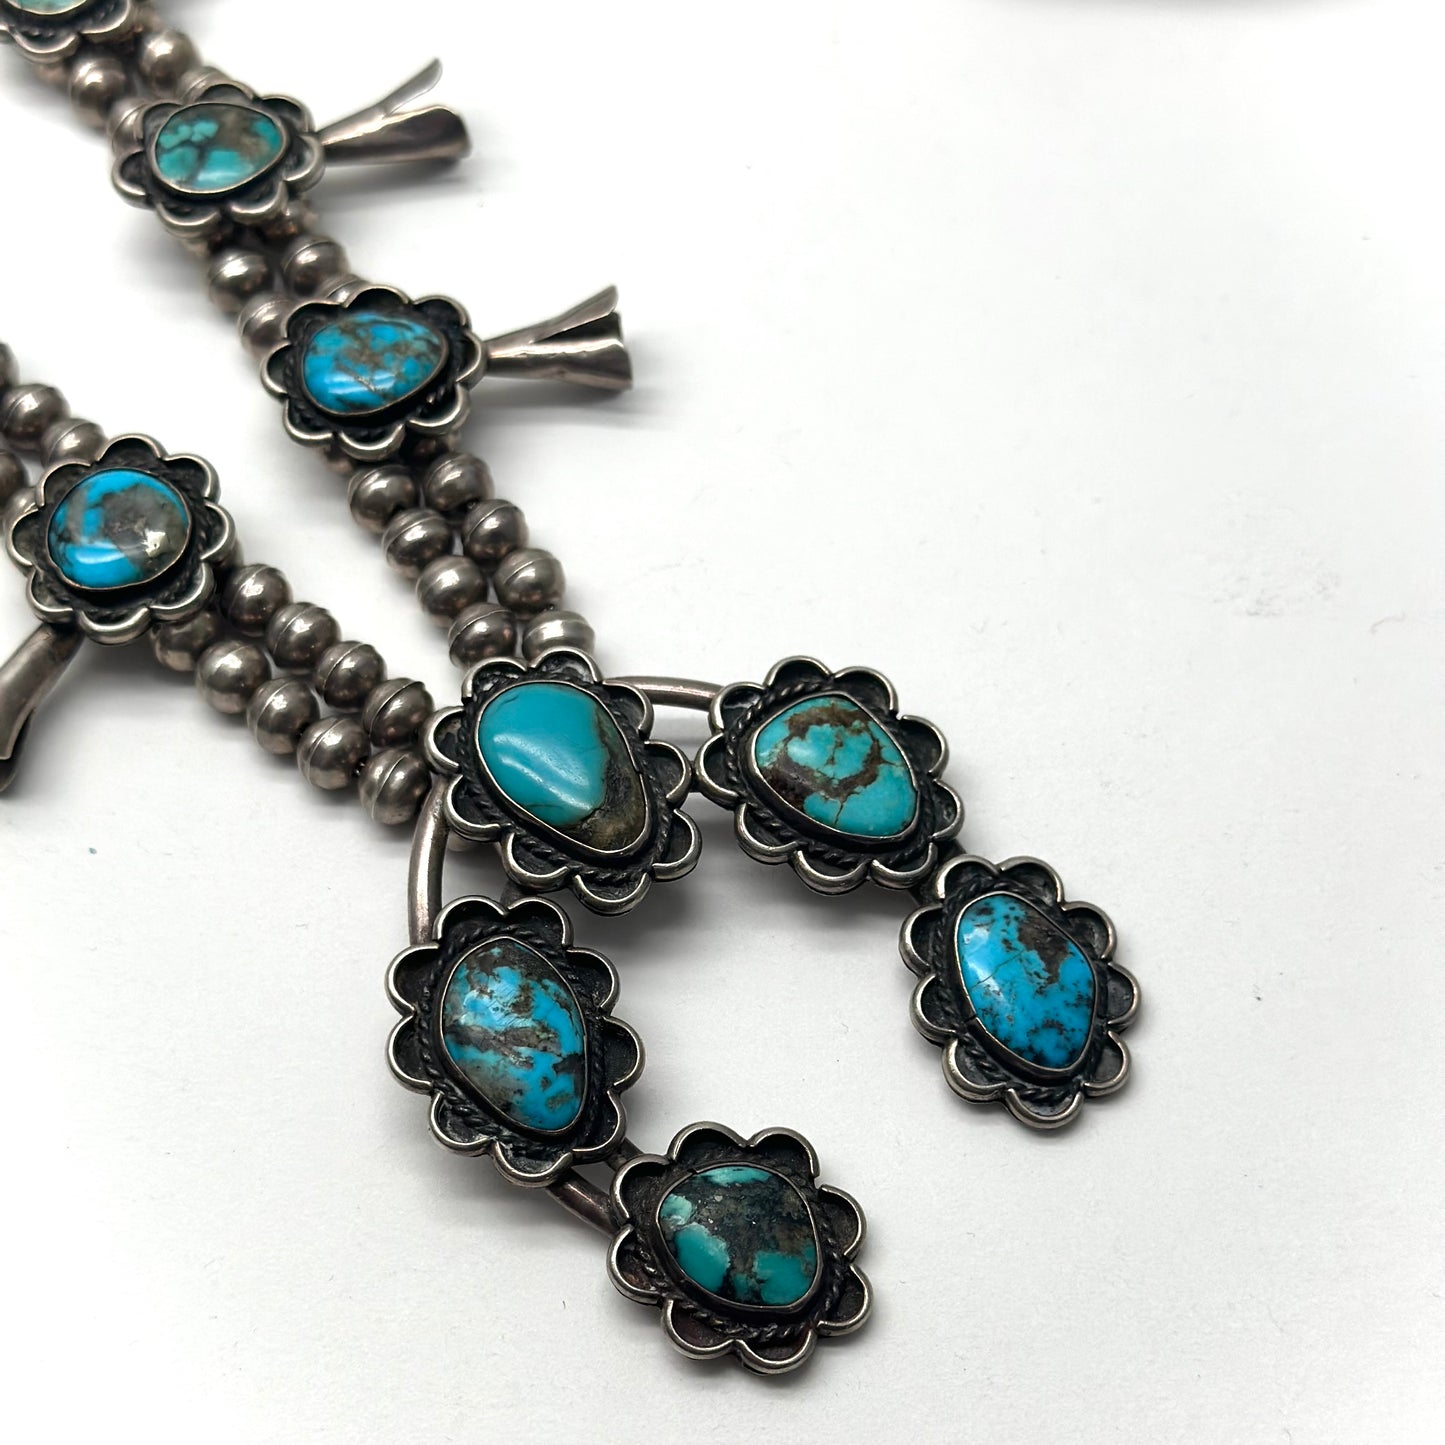 Navajo Natural Sleeping Beauty Turquoise Petit Point Cluster Squash Blossom  Necklace And Matching Earrings - NL#1203 - Native American Jewelry -  SilverTQ, LLC